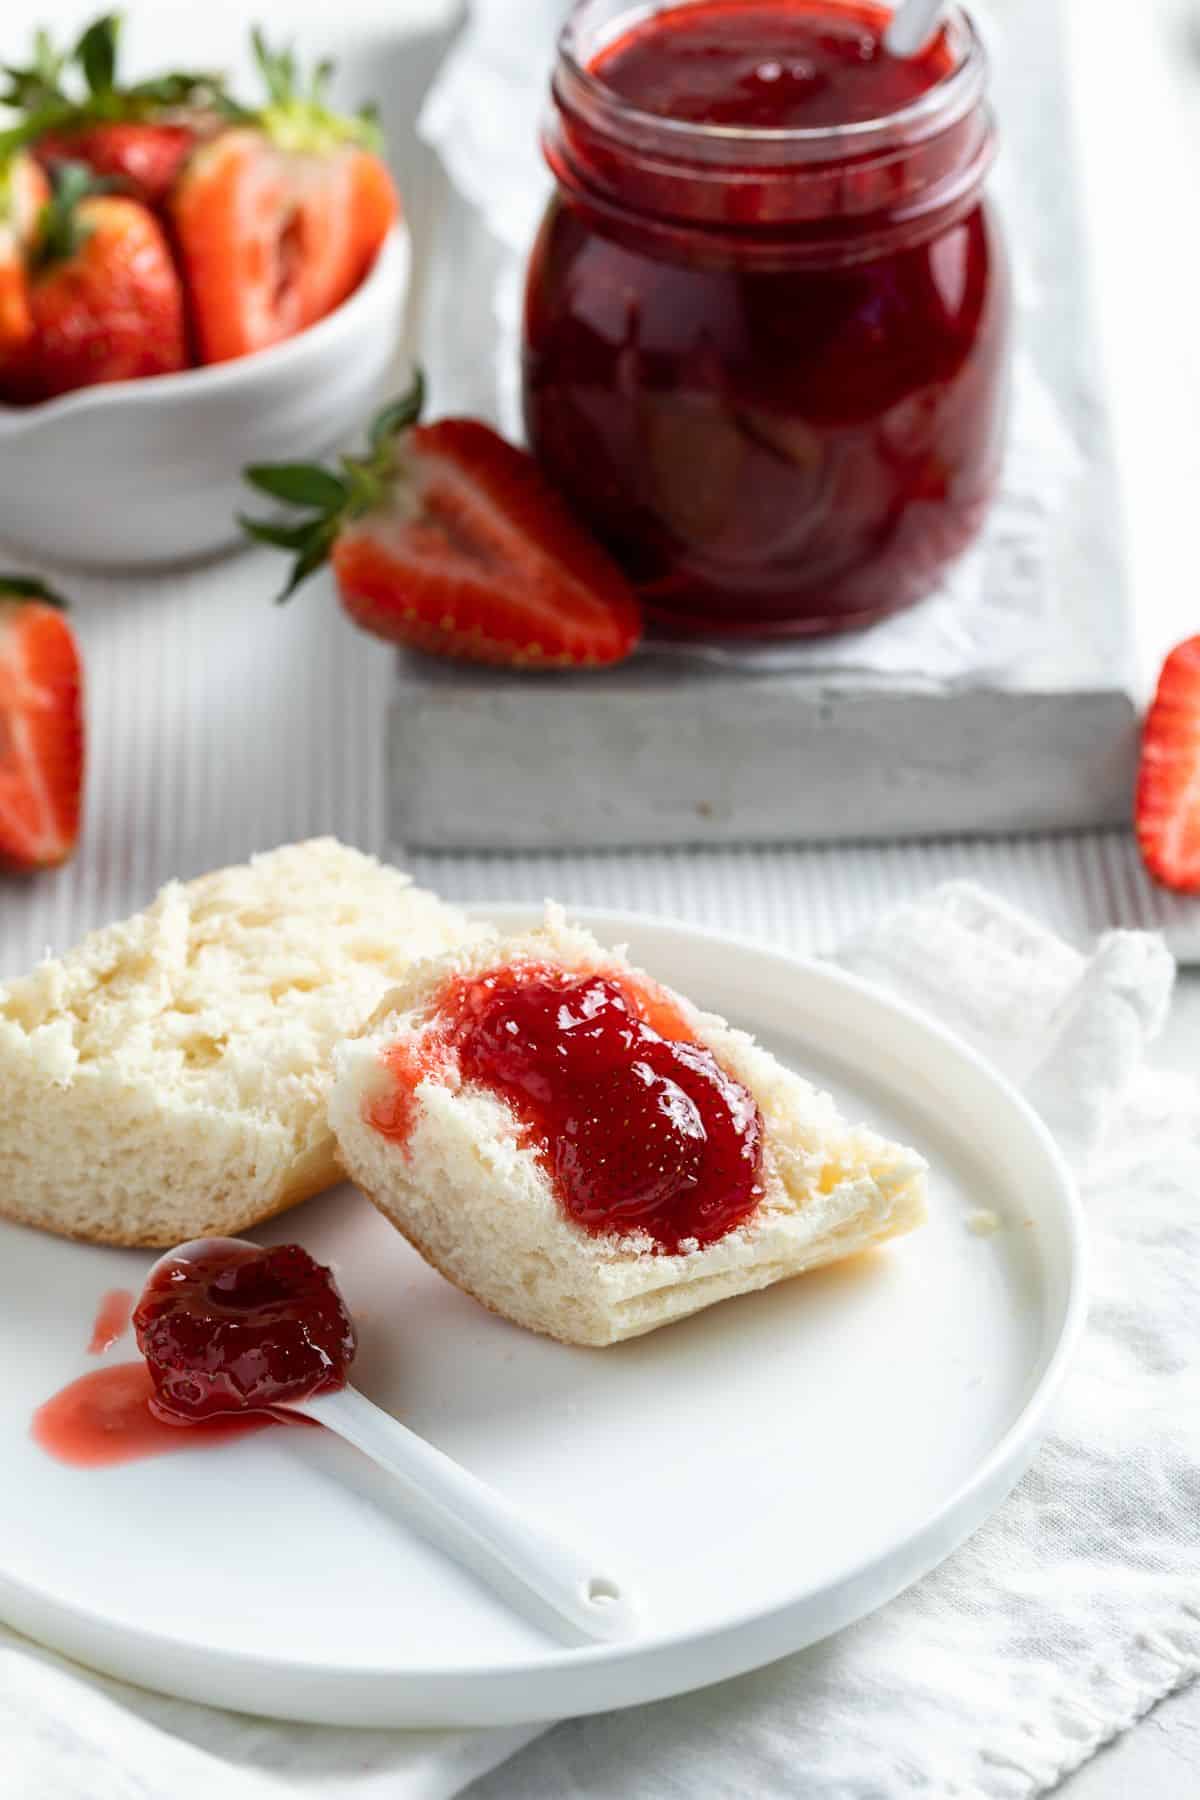 Bread with some strawberry jam on top, sitting on a white plate, with an open jar of jam in the background.